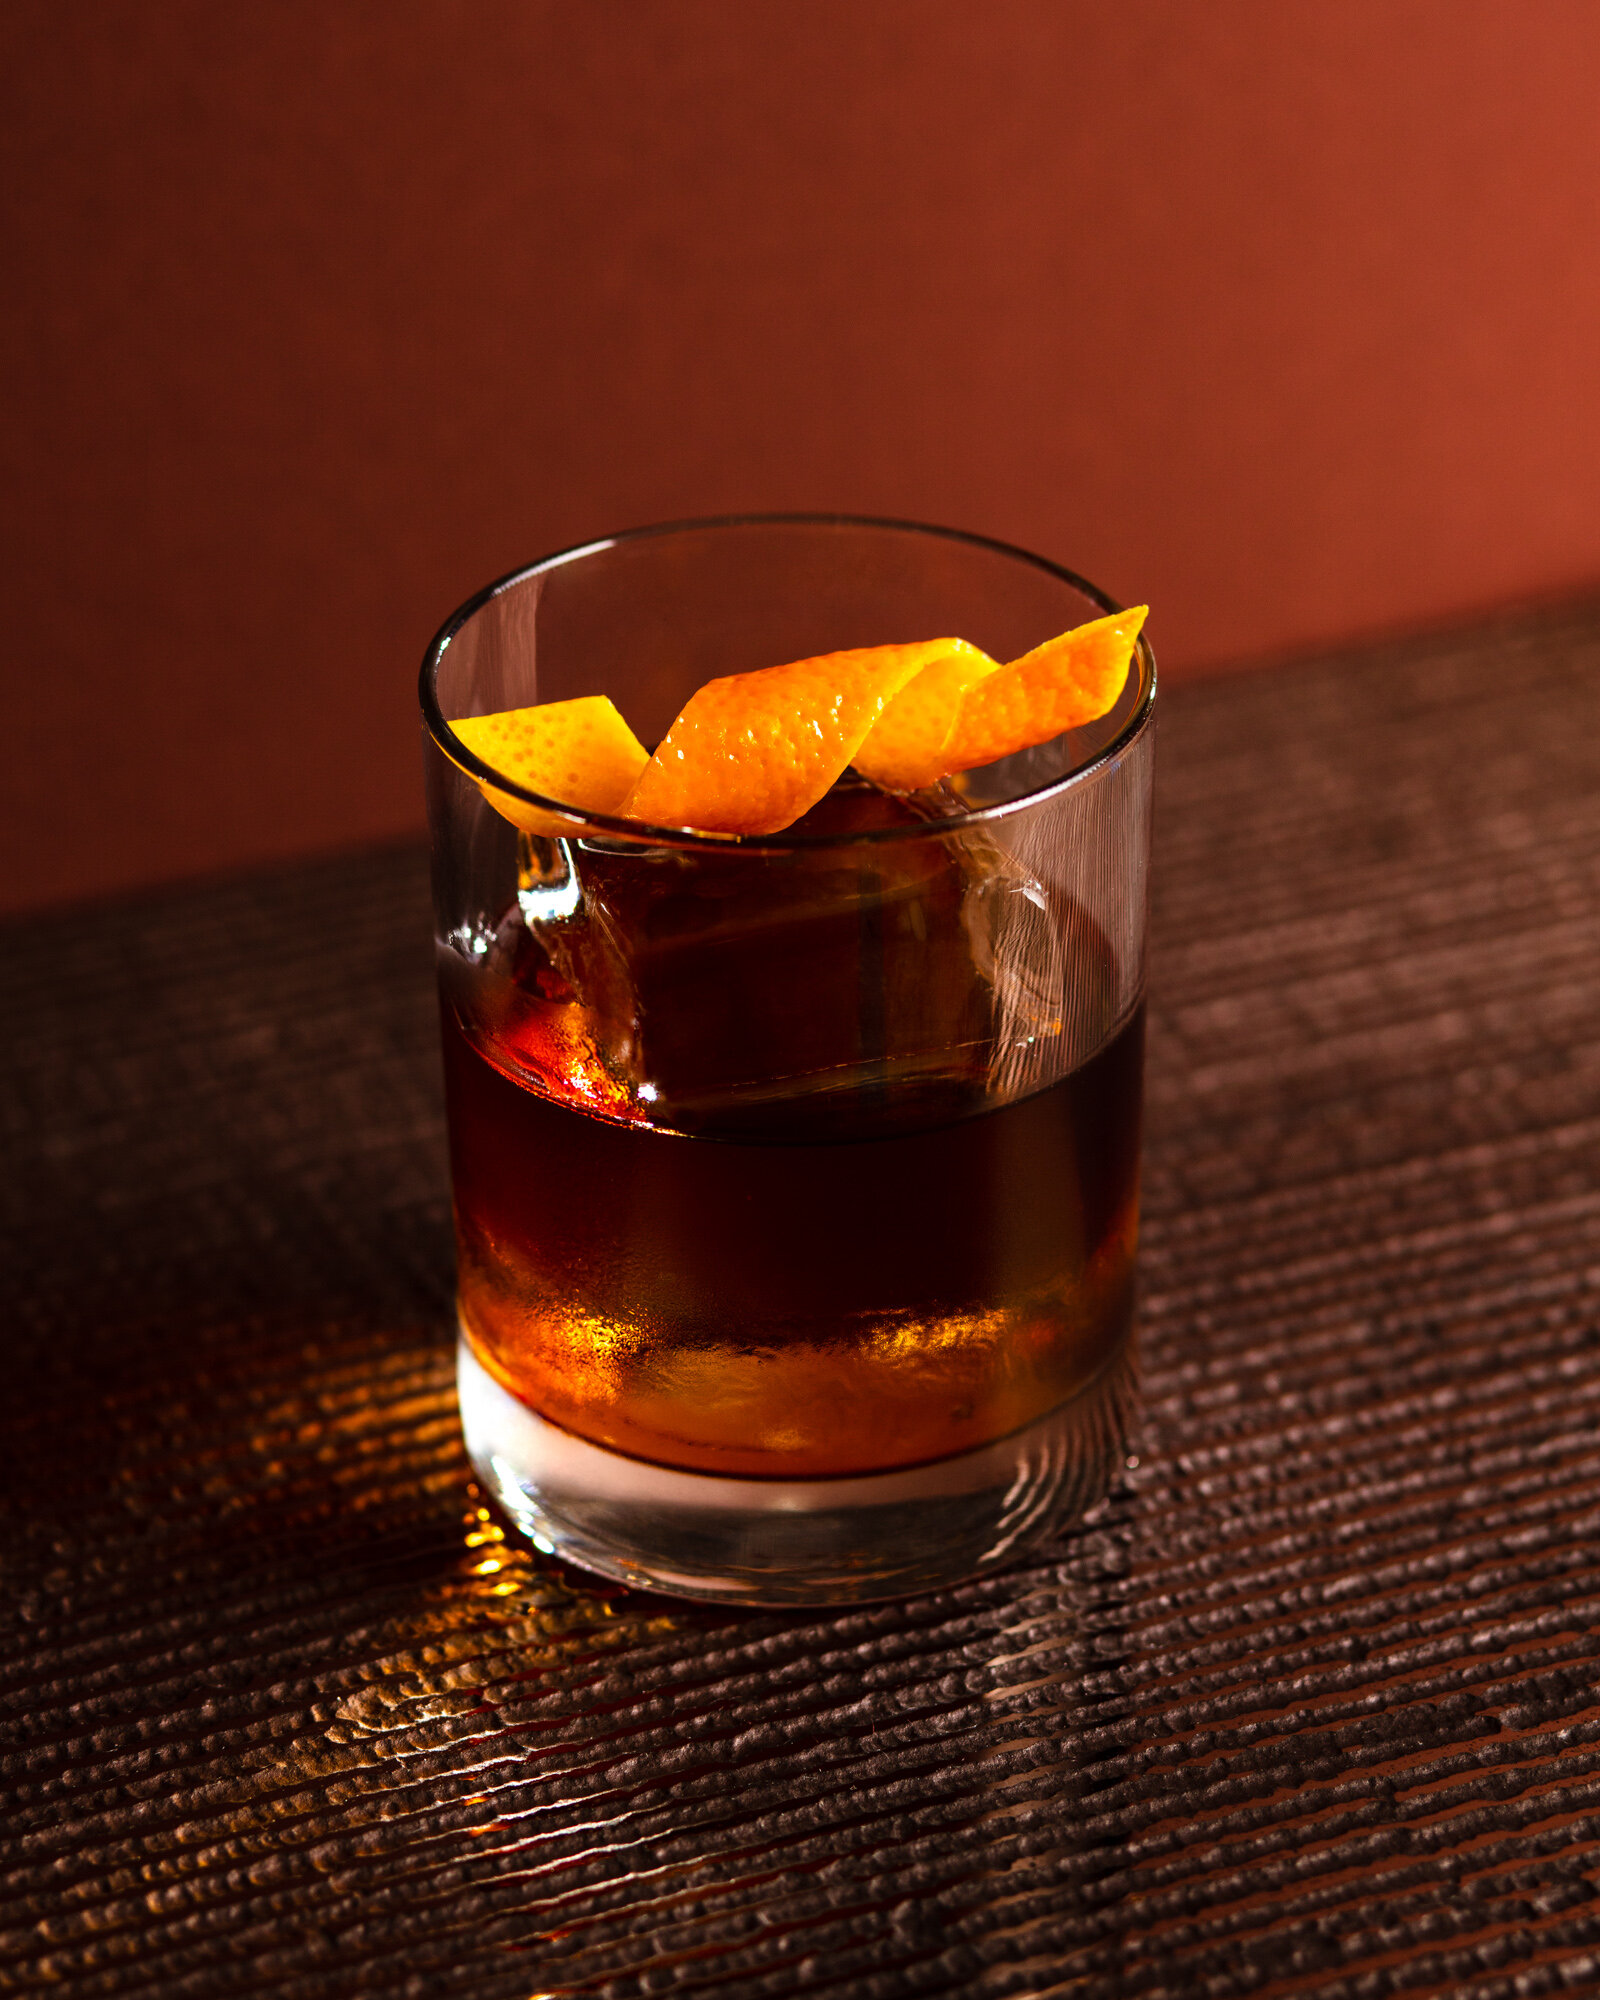 Louisiana Purchase
-
2 dashes Angostura Bitters
.5 oz DOM B&eacute;n&eacute;dictine 
.5 oz Laird's Single Cask Apple Brandy
1.5 oz R&eacute;my Martin 1738 Accord Royal

Combine all ingredients in a Double Old Fashioned glass, gently lower in a temper